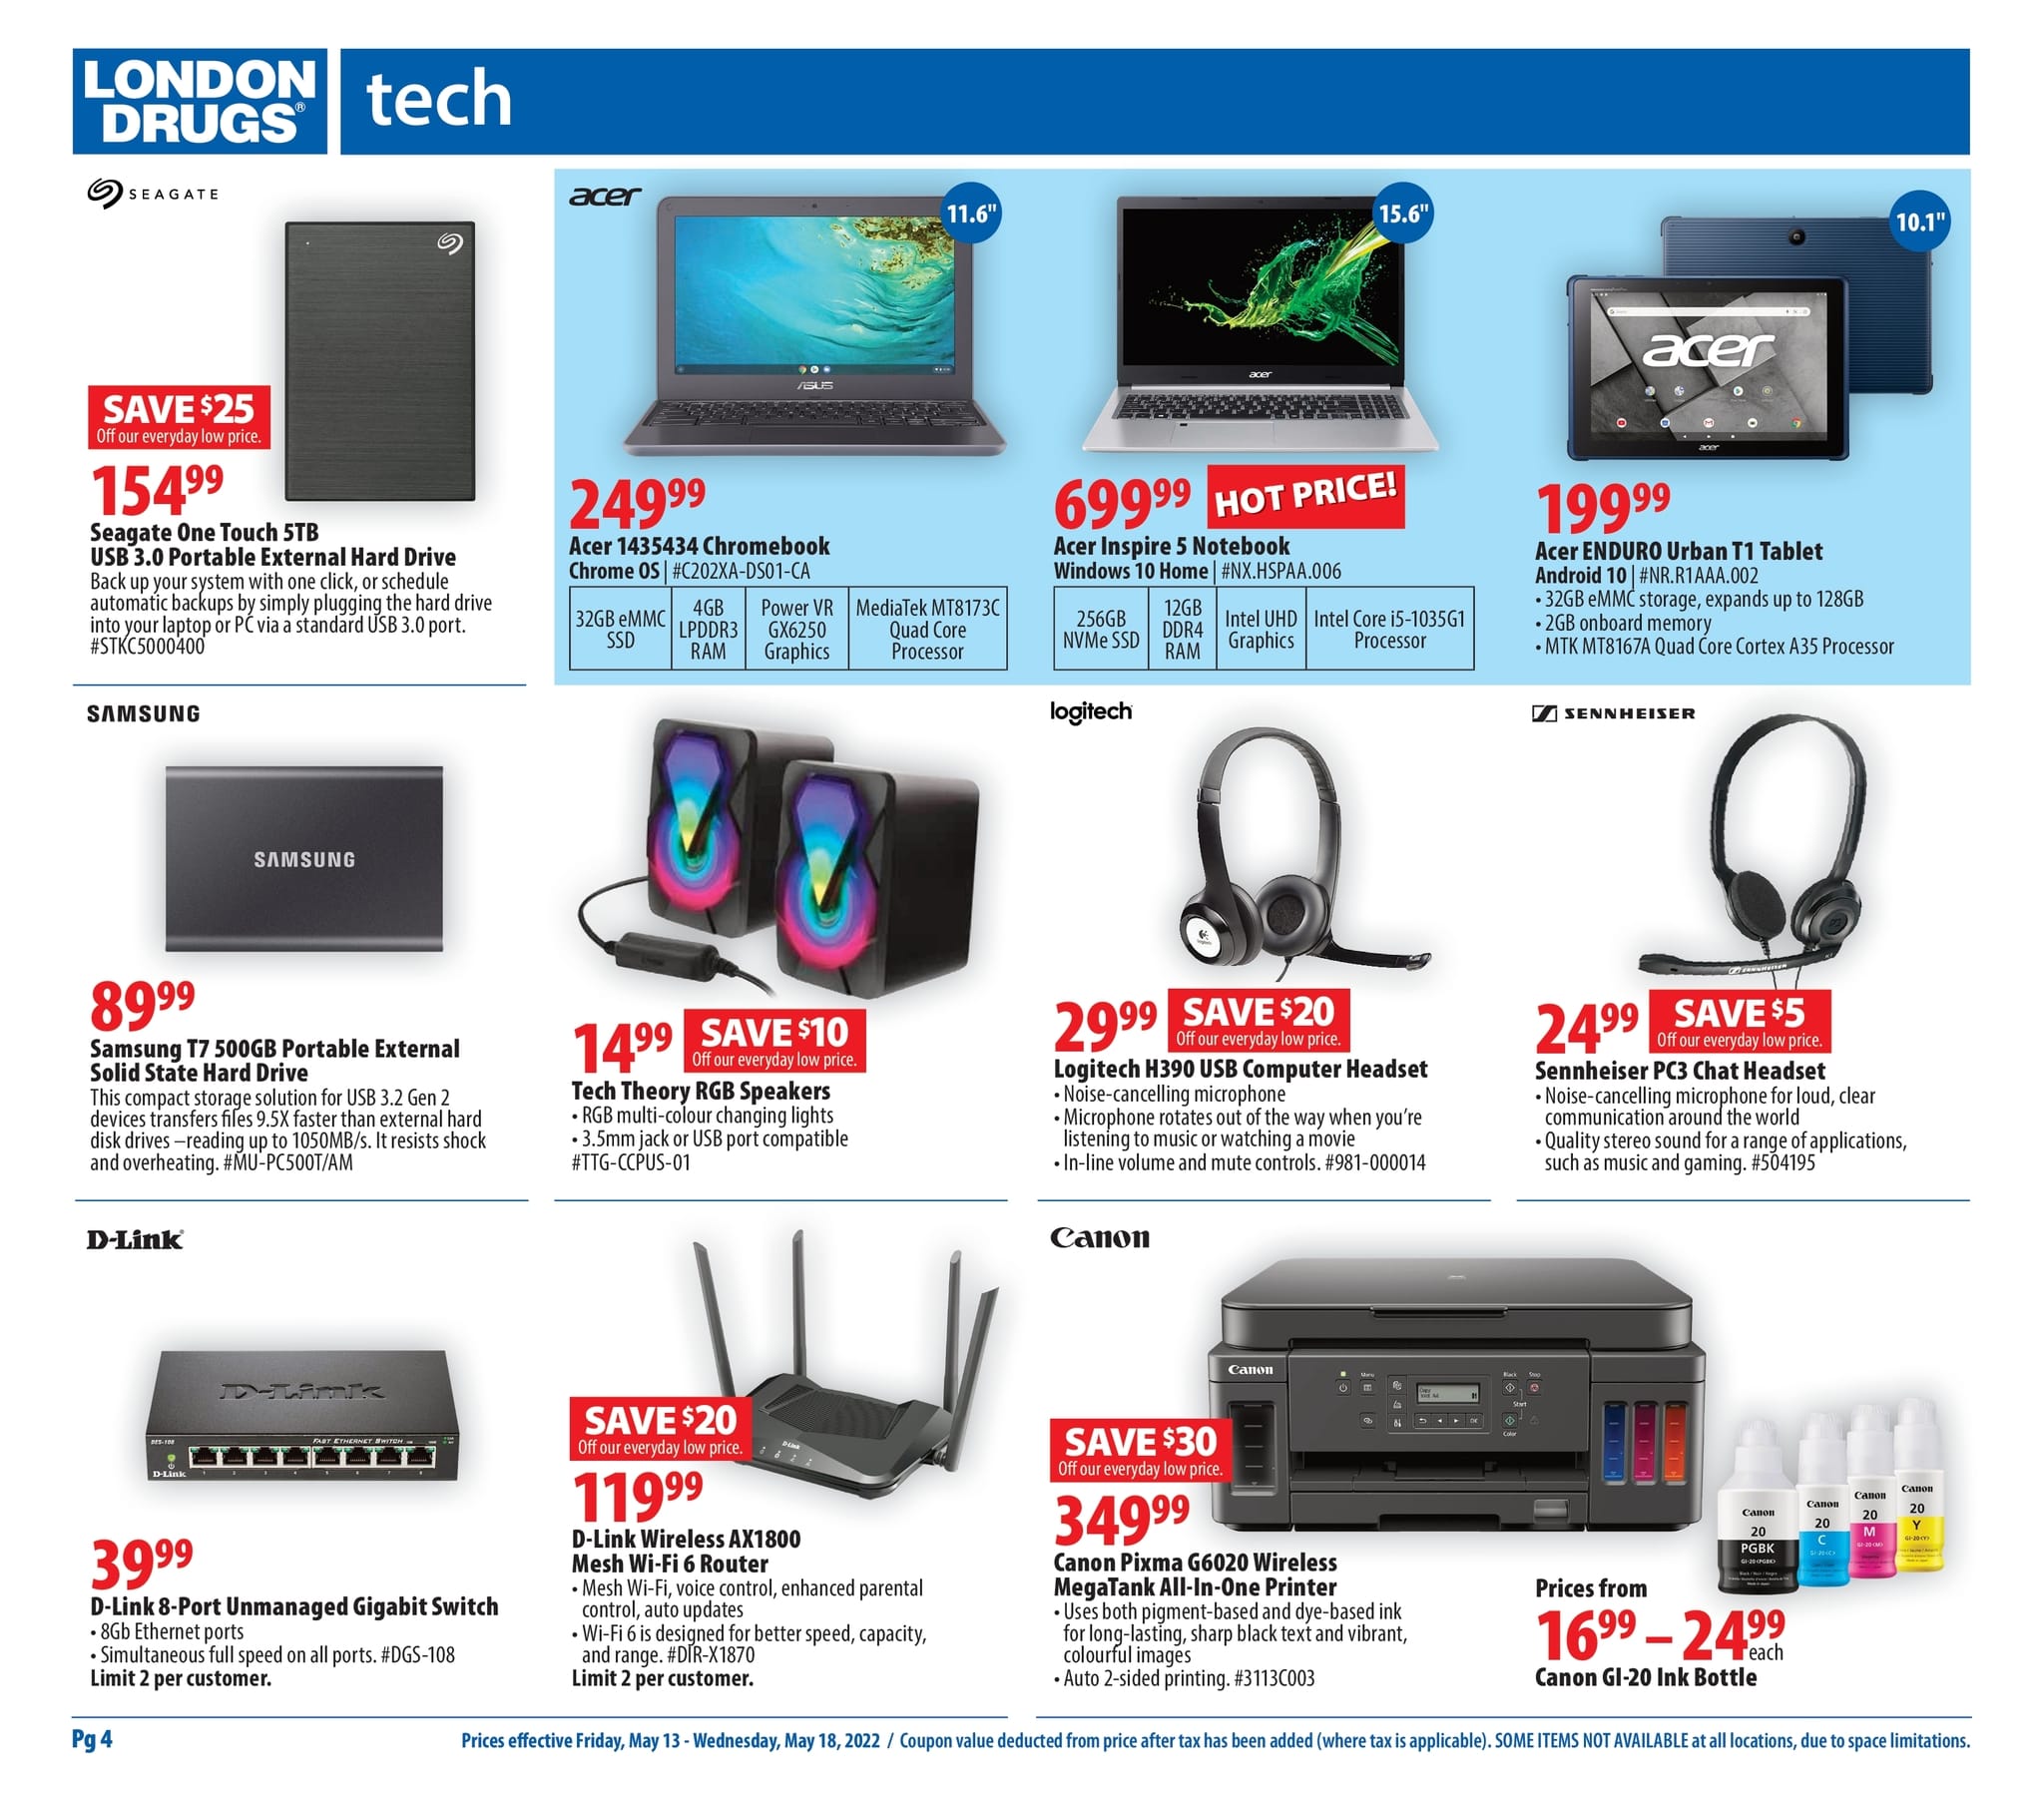 London Drugs - Weekly Flyer Specials - Page 4